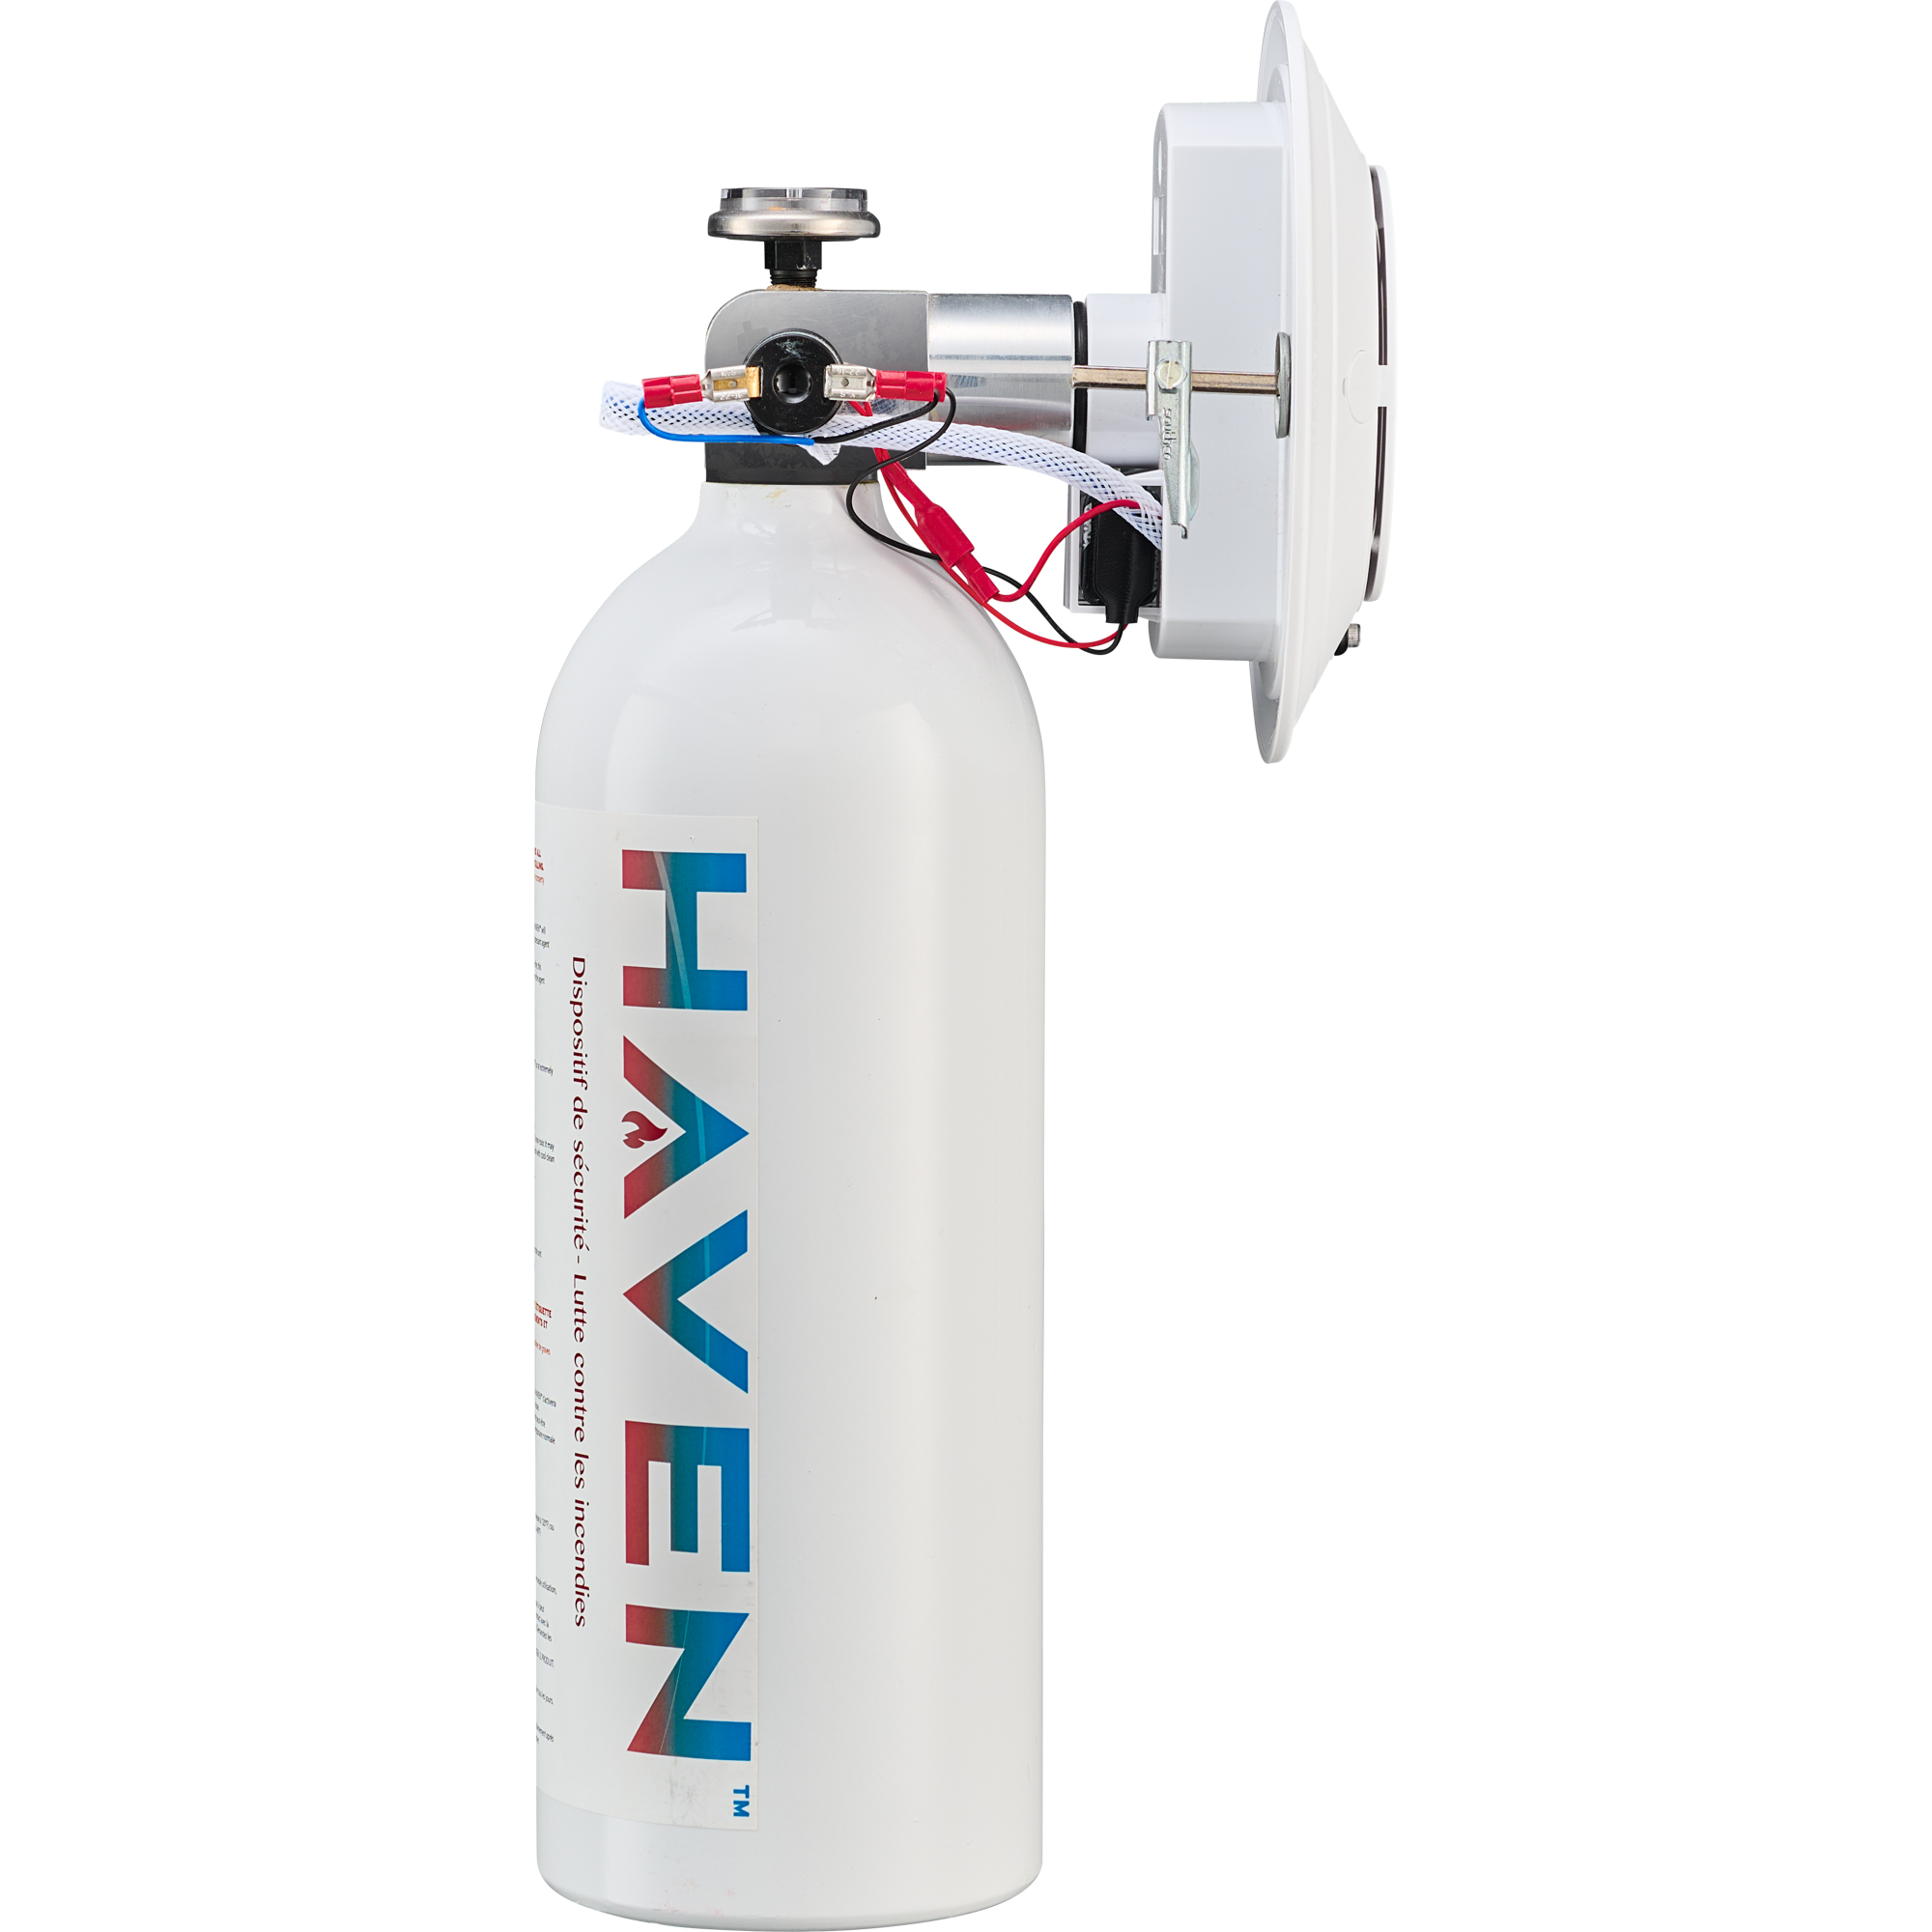 HAVEN 5lb Fire Suppression Safety Device 200F - 93C Rated